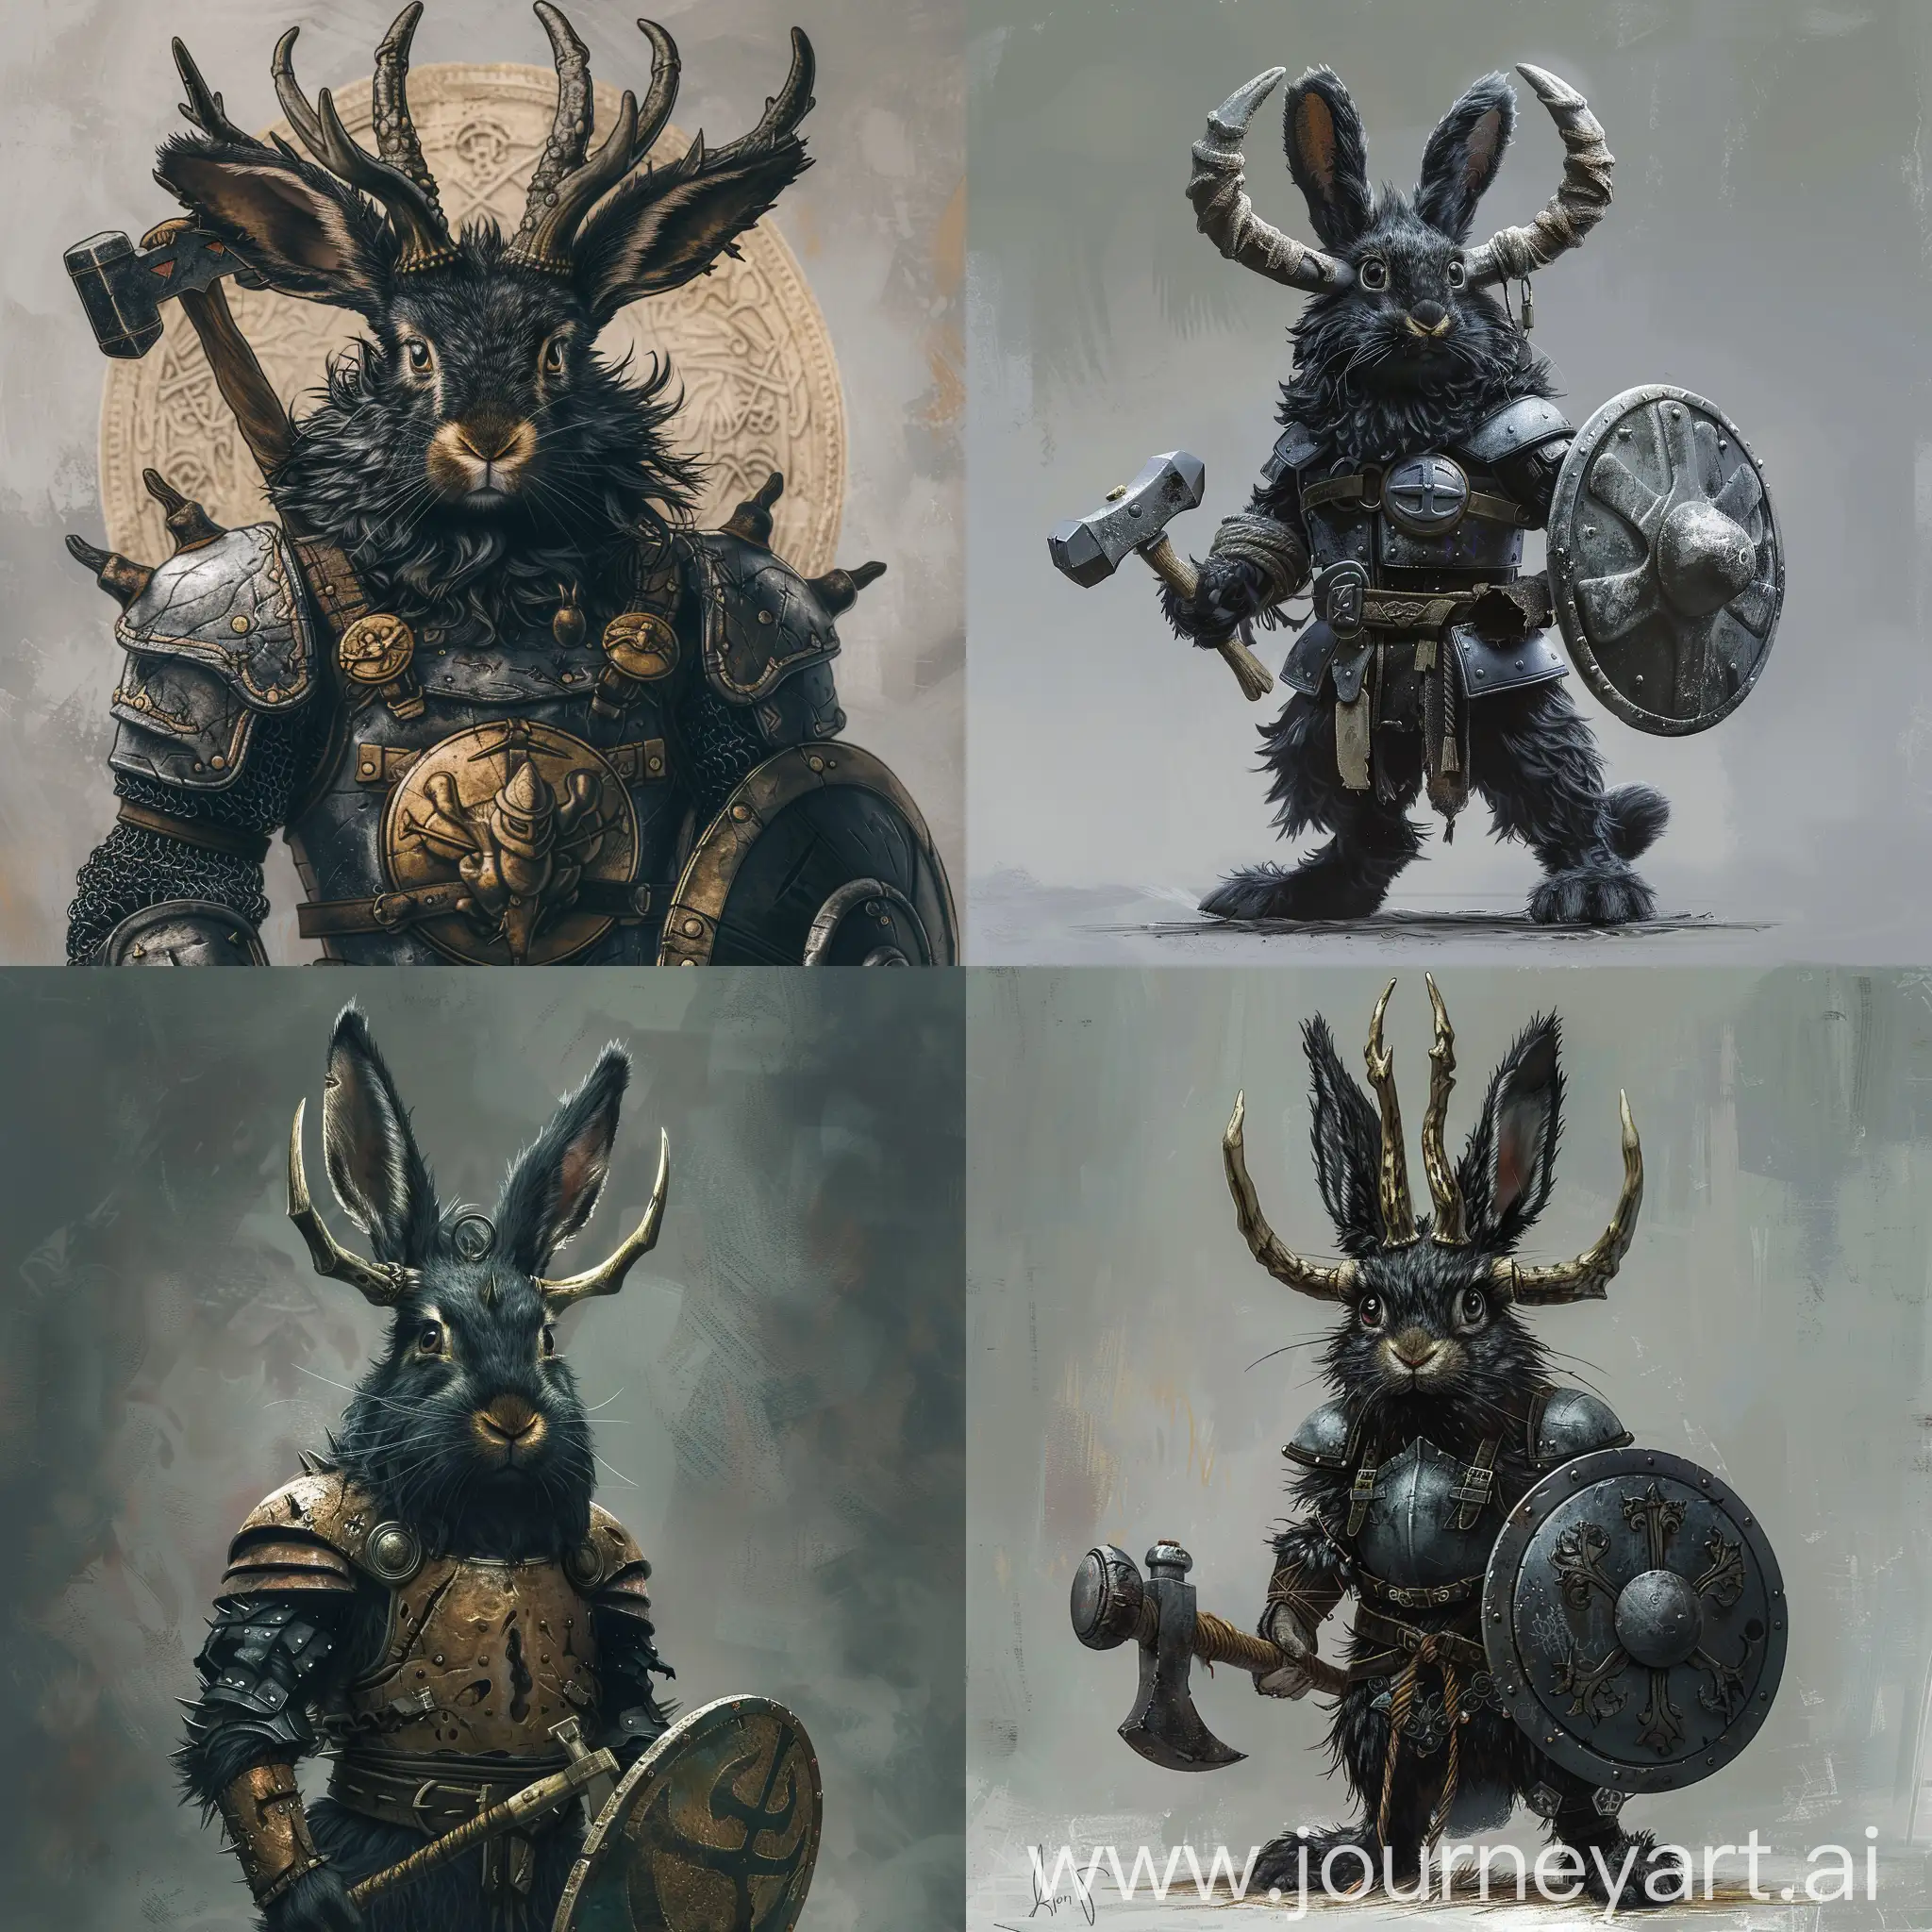 humanoid hare with black fur, horns like a young deer on his head, he has a ferocious look, wearing a heavy mediaval armor a shield and a hammer and he is about one meter tall